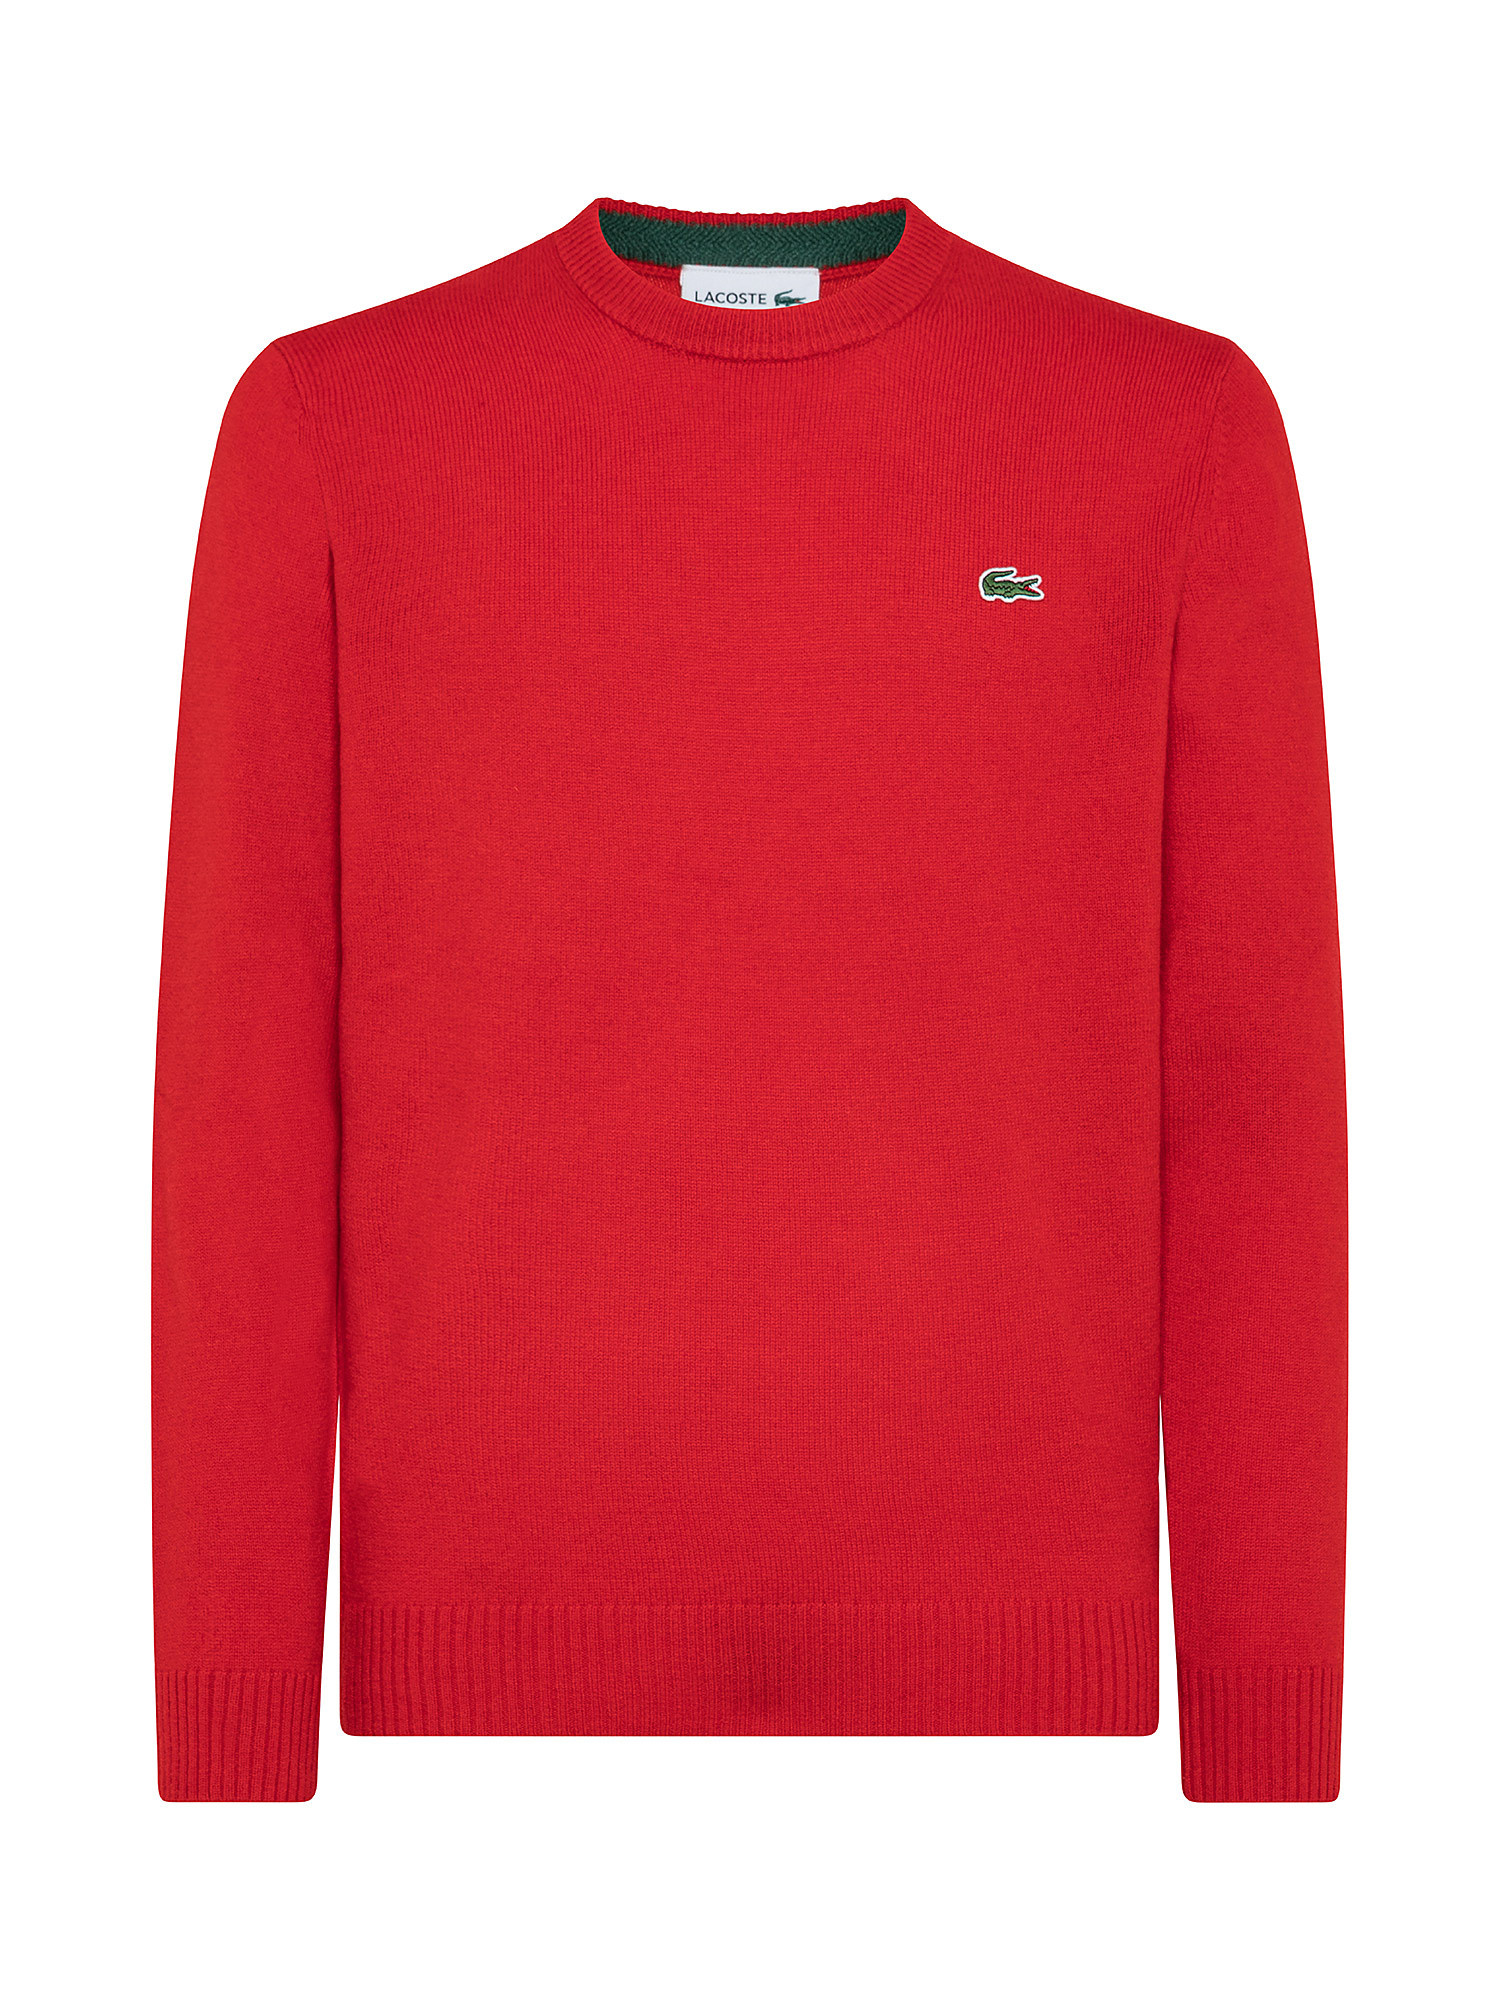 Men's organic cotton crew neck sweater, Red, large image number 0